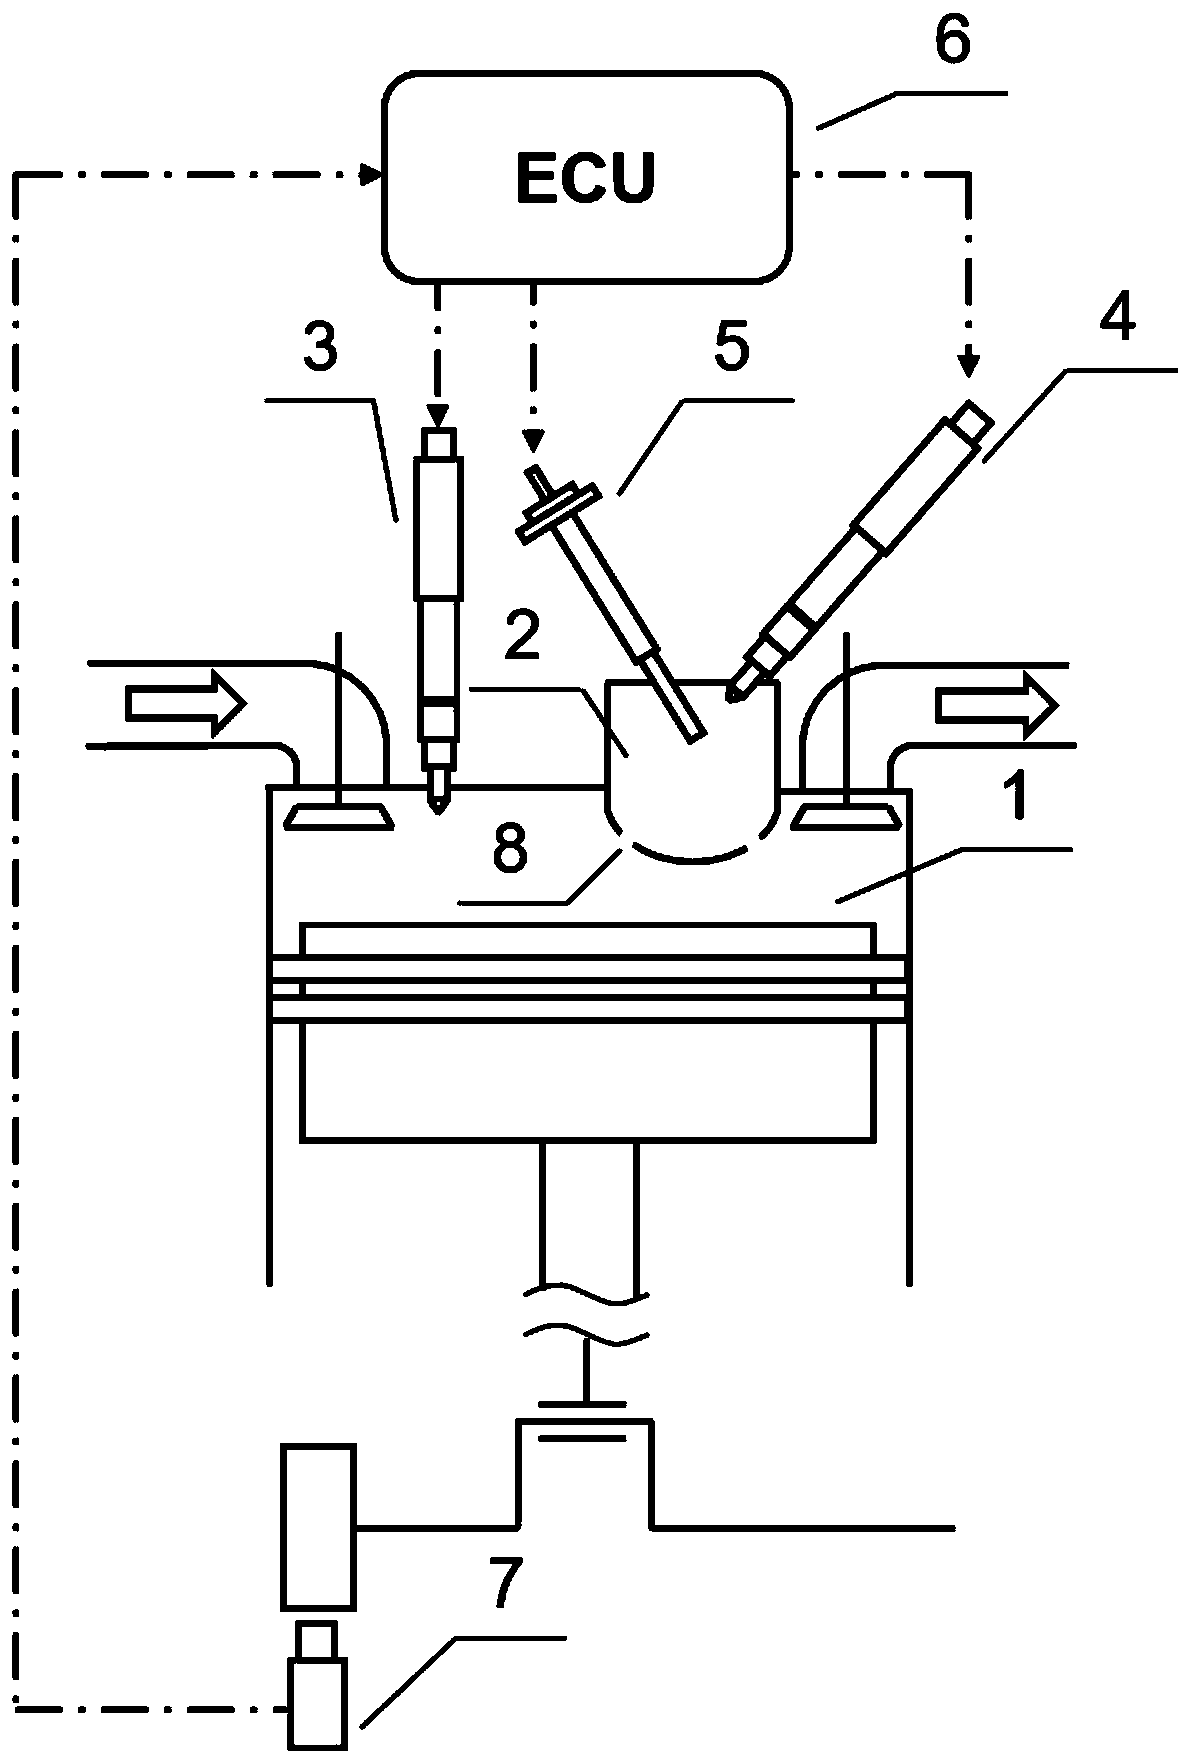 An engine with a secondary combustion chamber